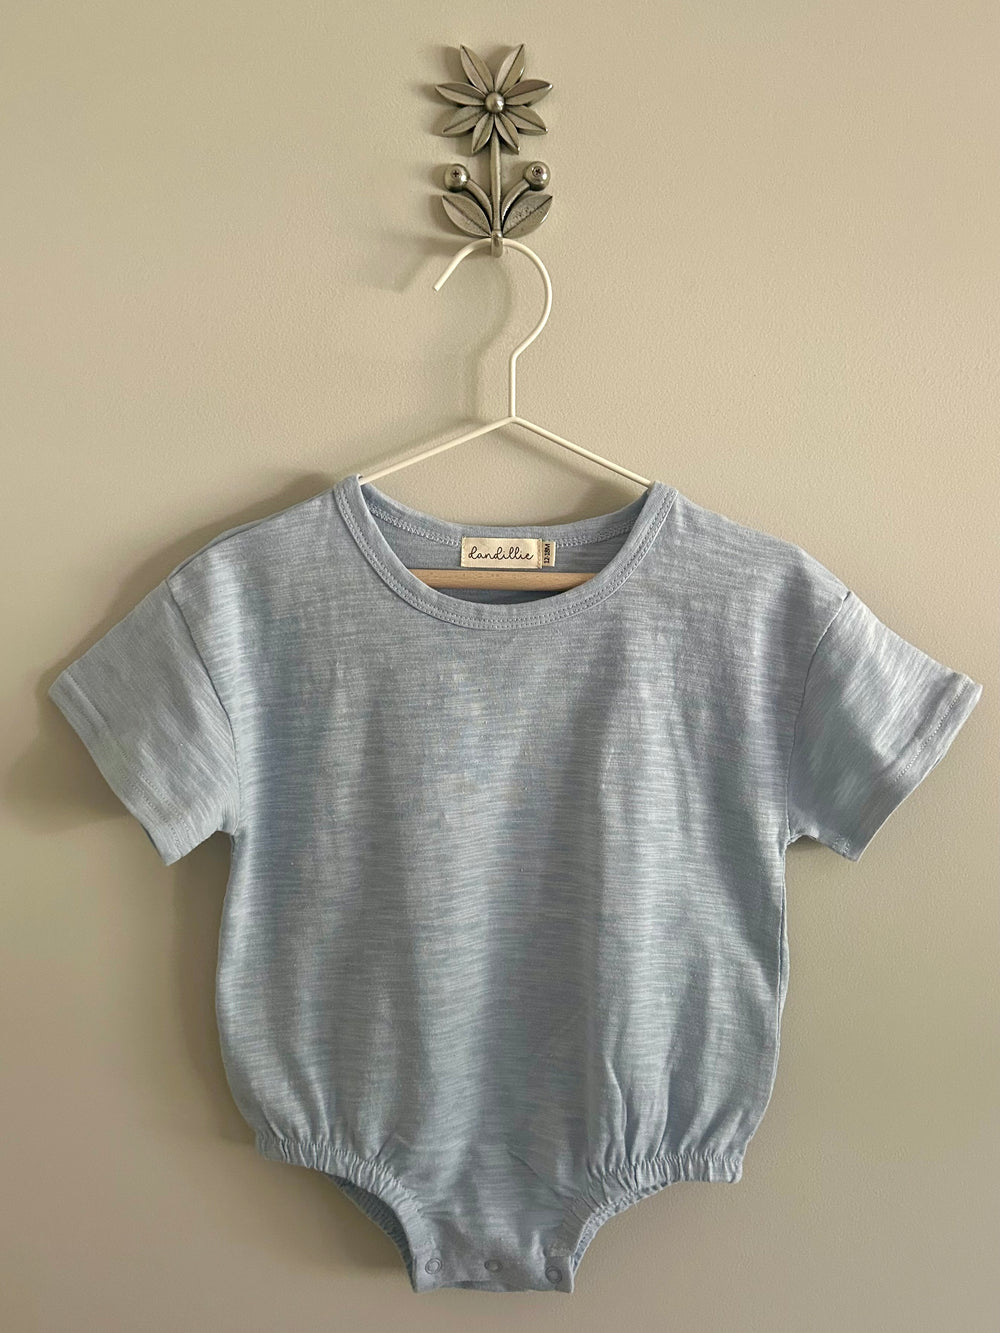 Organic cotton bubble tee. Lightweight and perfect for summer!